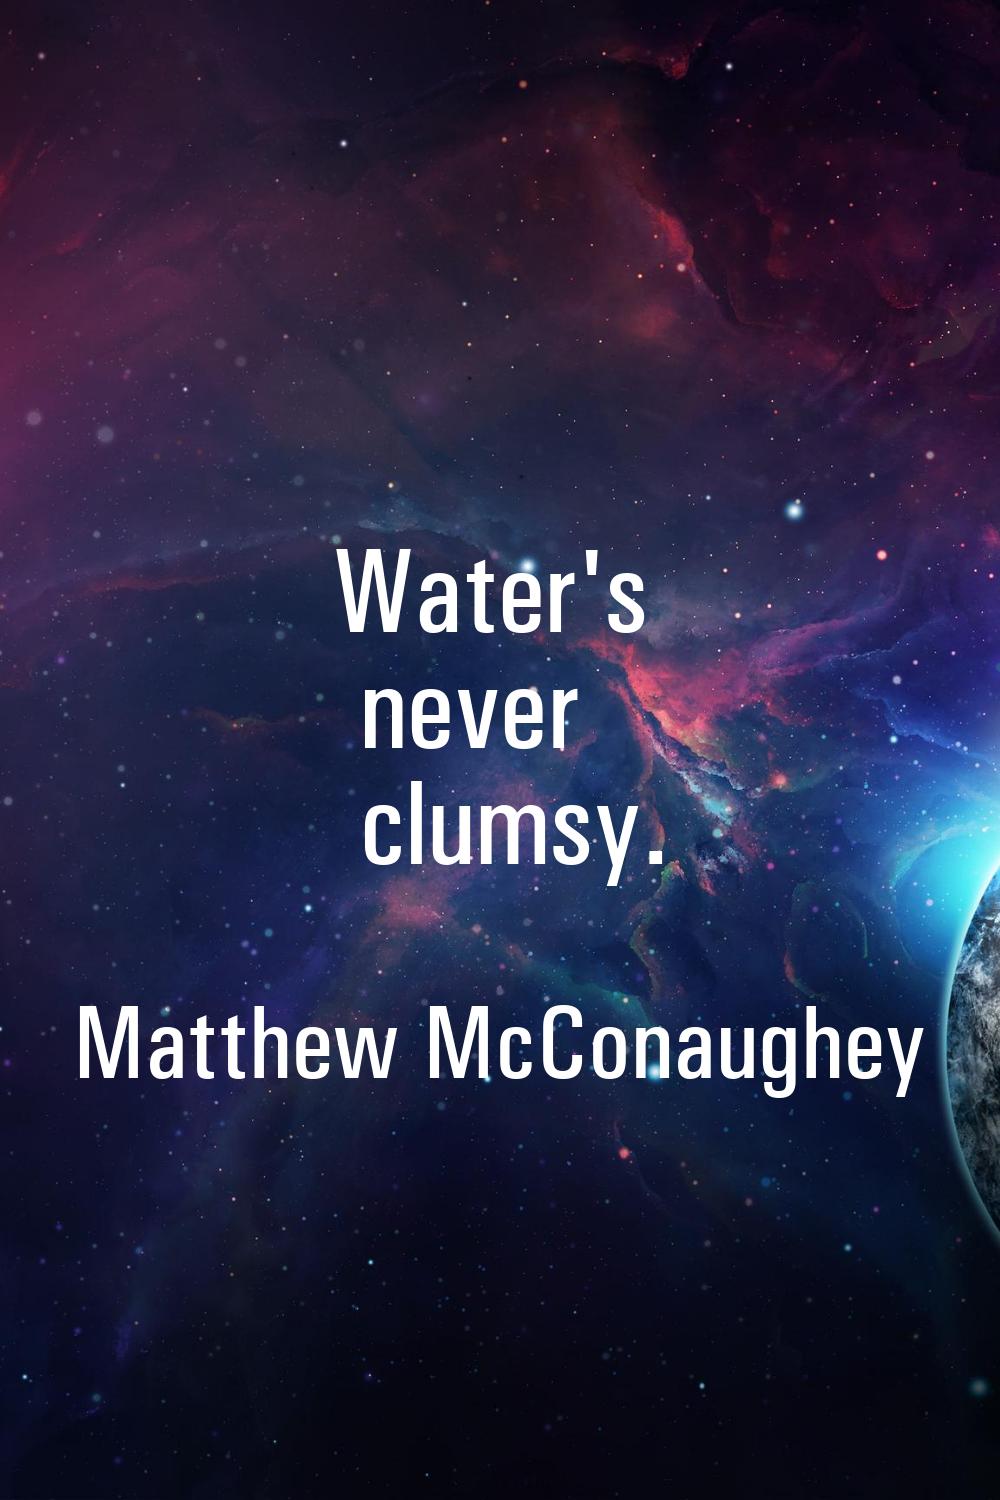 Water's never clumsy.